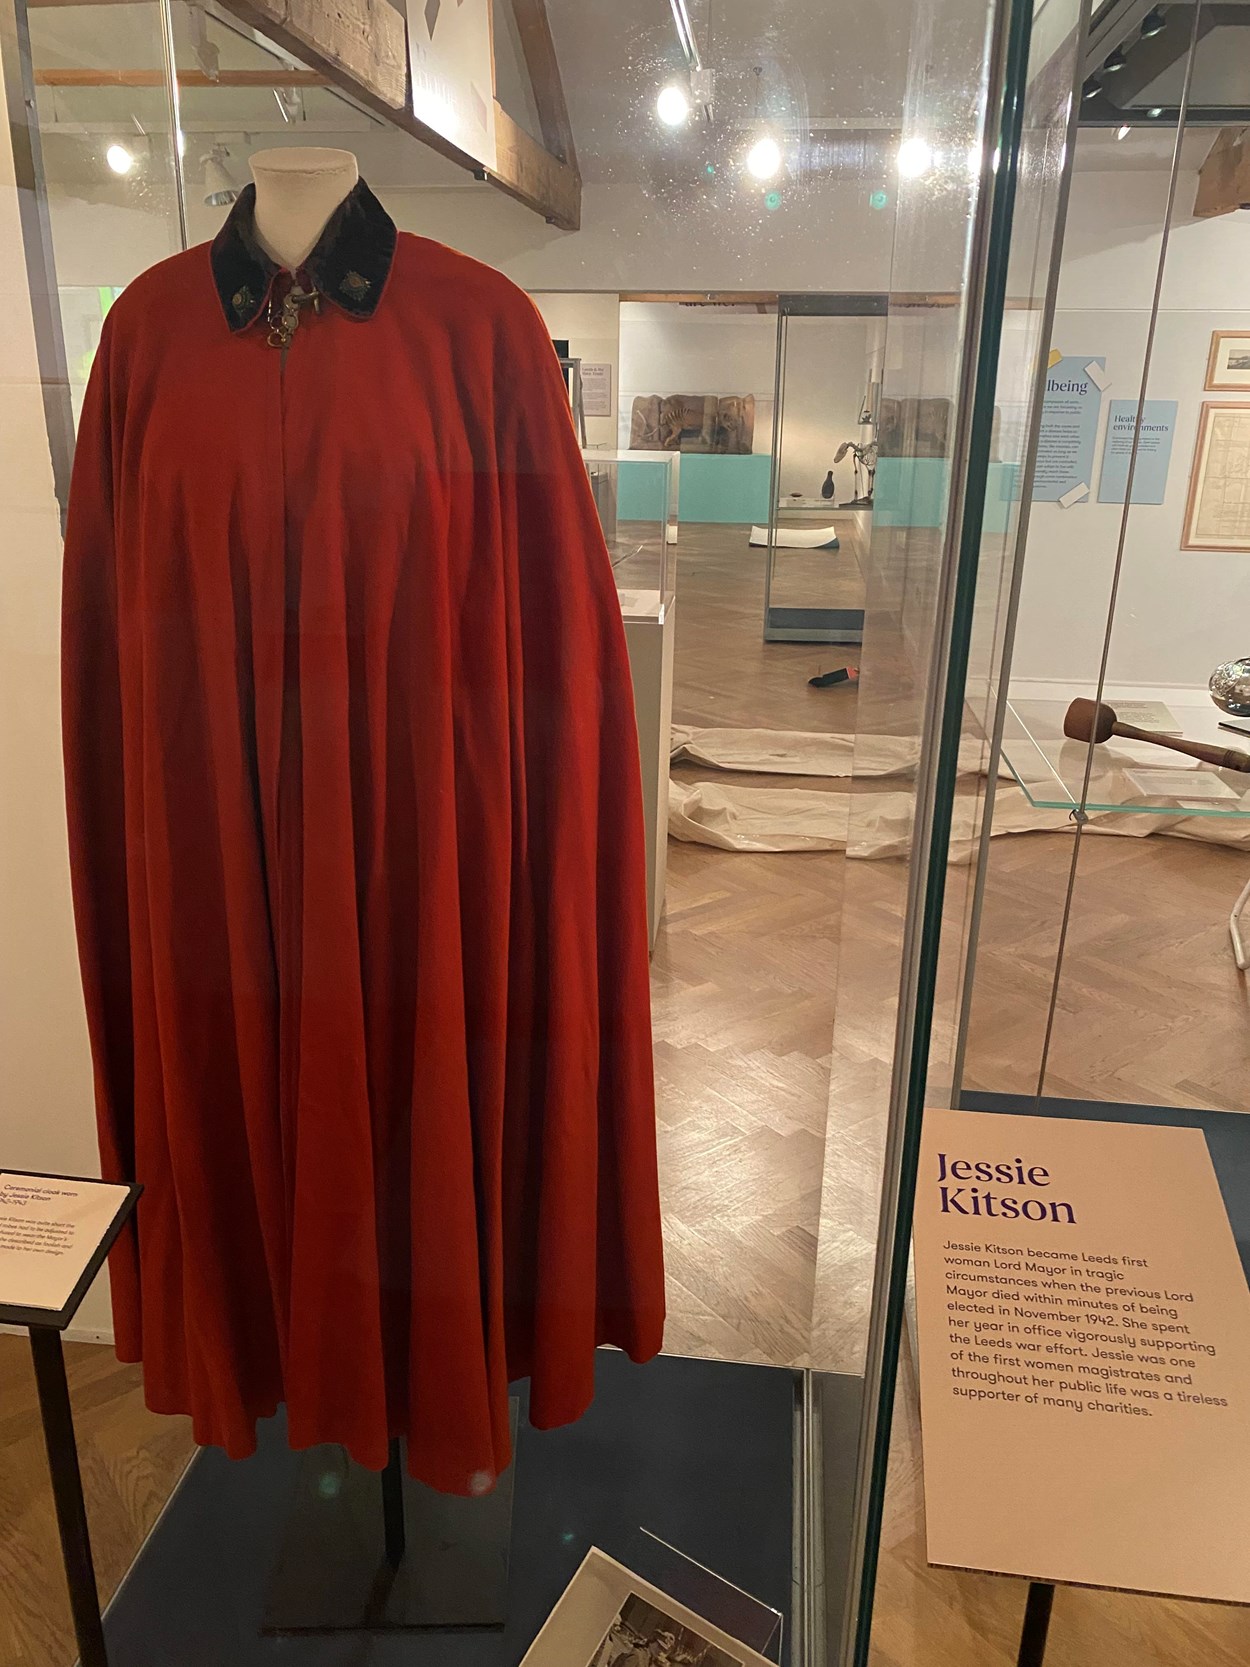 Leeds City Museum 200: Robe worn by Jessie Kitson, the first woman to be Lord Mayor of Leeds. She was also one of the first women magistrates.